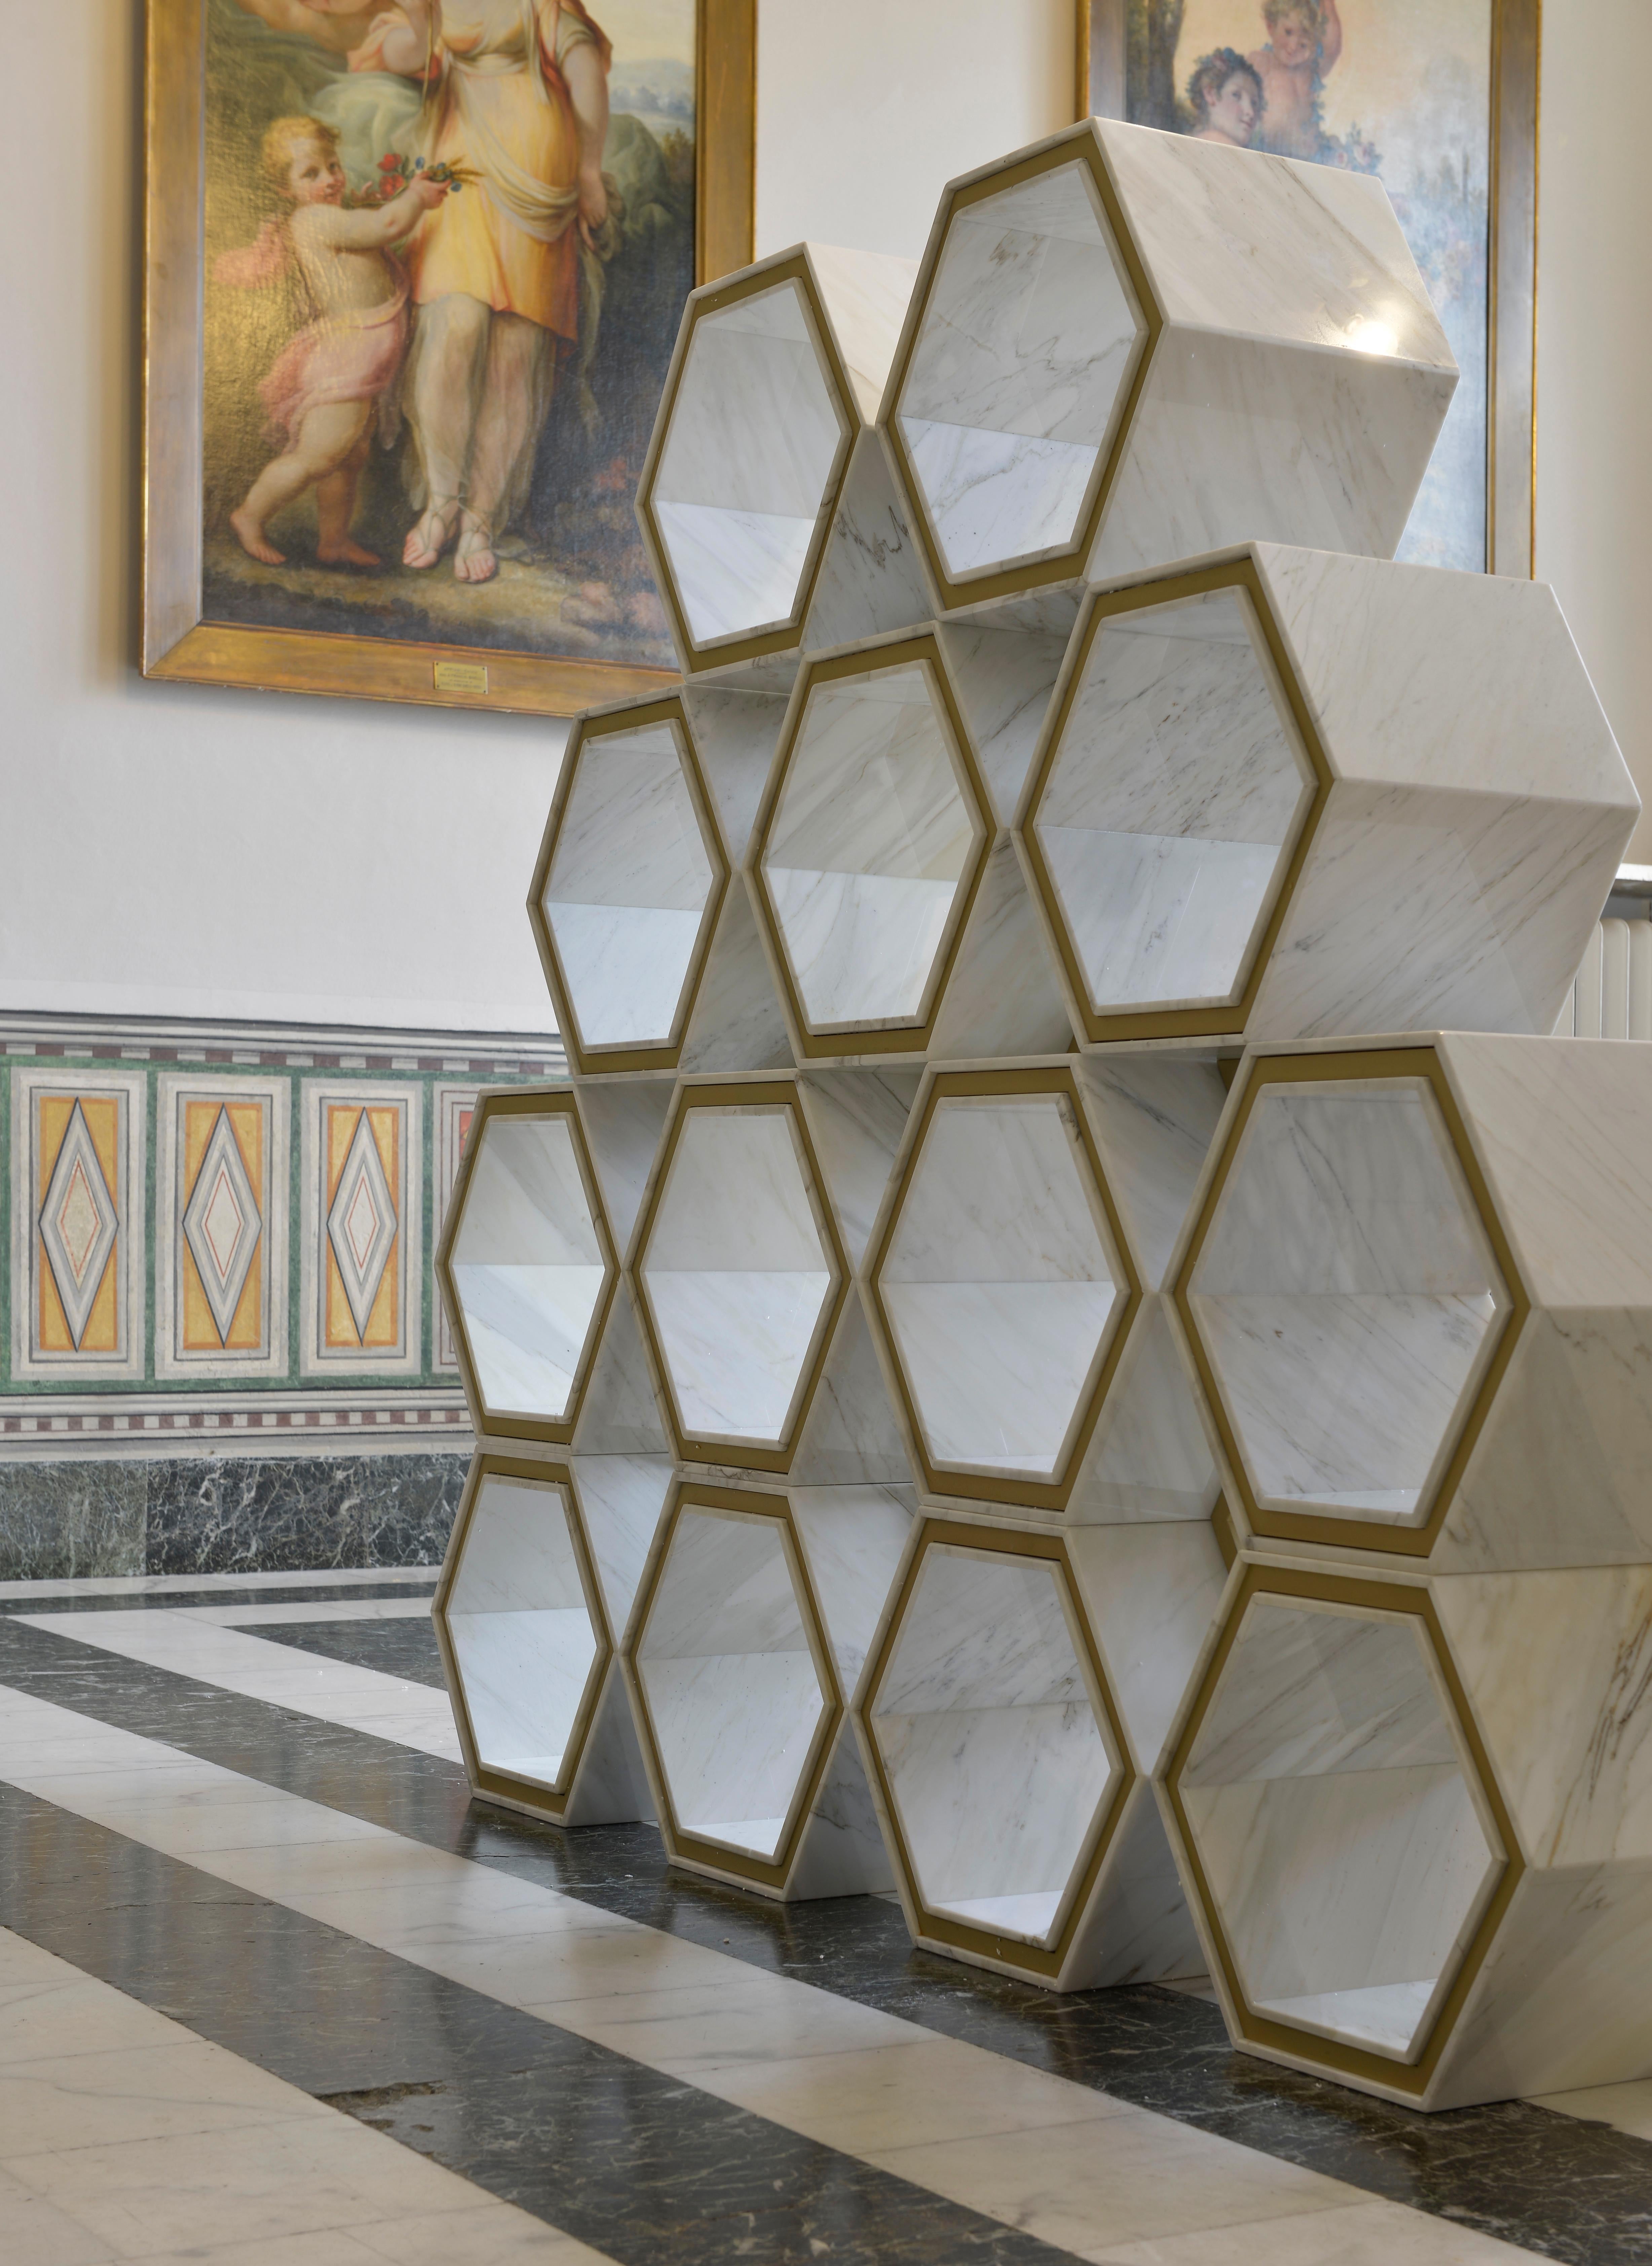 One of the myriad ways that the Hexagon bookcase can be used to elegantly structure space and house objects. This elegant hexagon-shaped bookcase is a combination of golden metal and marble exudes an elegant atmosphere. The rhombic and triangular